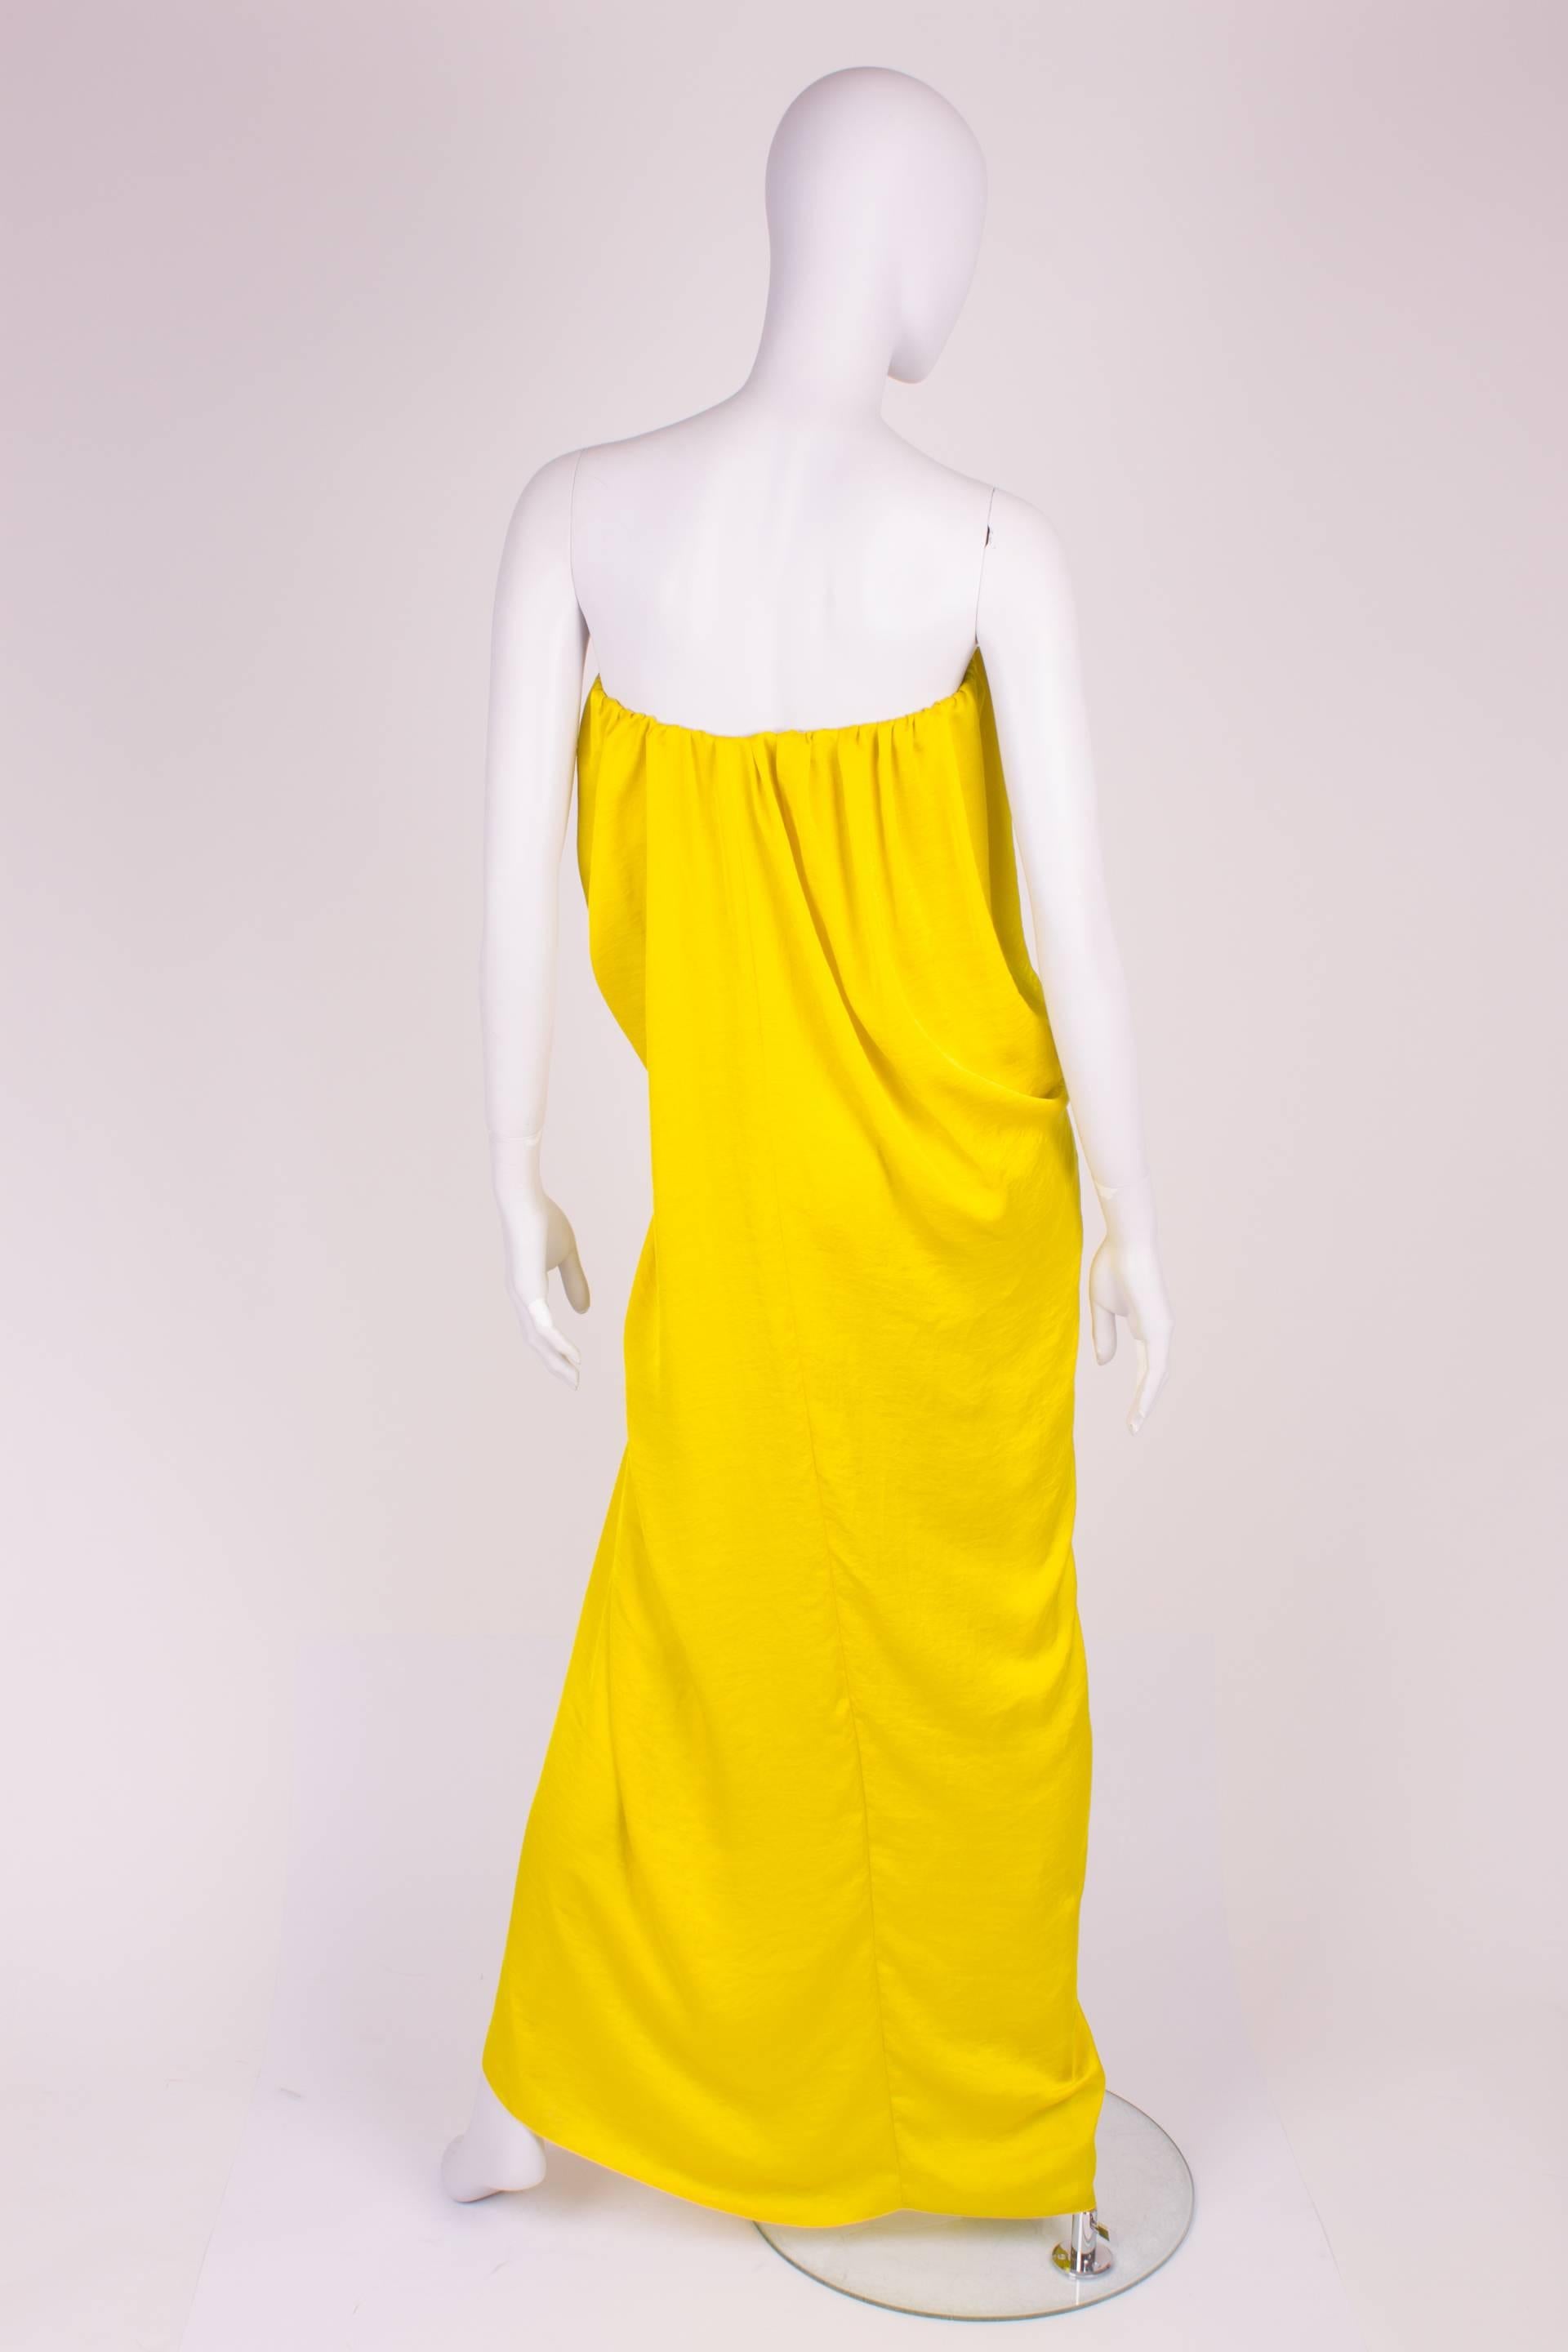 This canary yellow, strapless Lanvin evening dress will give you a special aura. He is easily combined with for example a summer scarf. He stays in place by the elastic corset at the chest. As a result, there's also beautiful folds in the dress. The